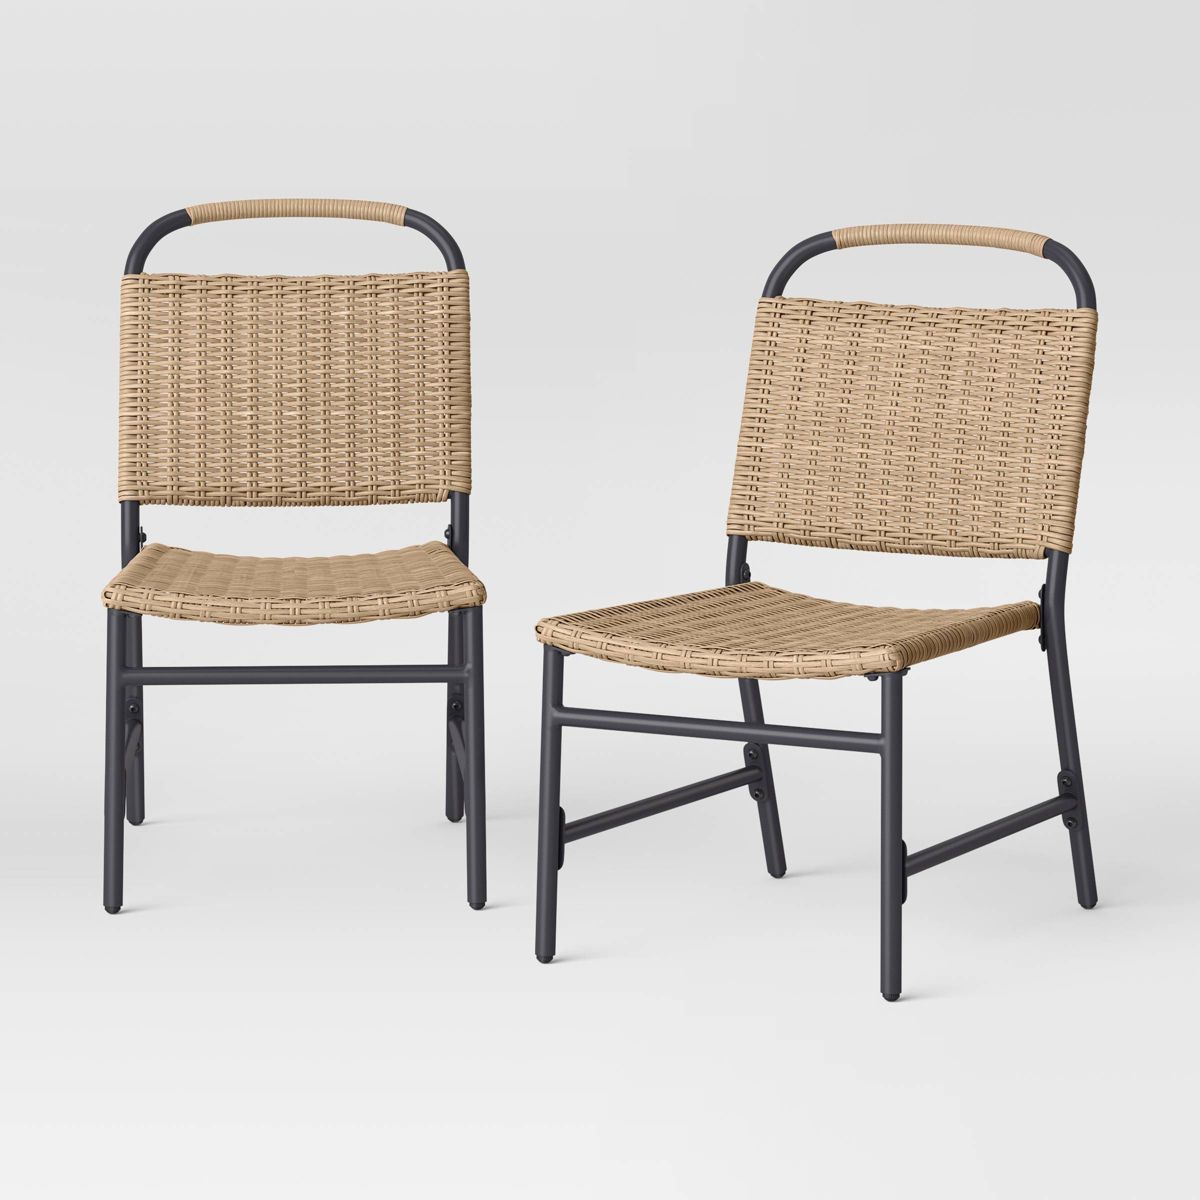 2pc Popperton Arched Wicker Outdoor Patio Dining Chair Armless Chair Black - Threshold™ designe... | Target